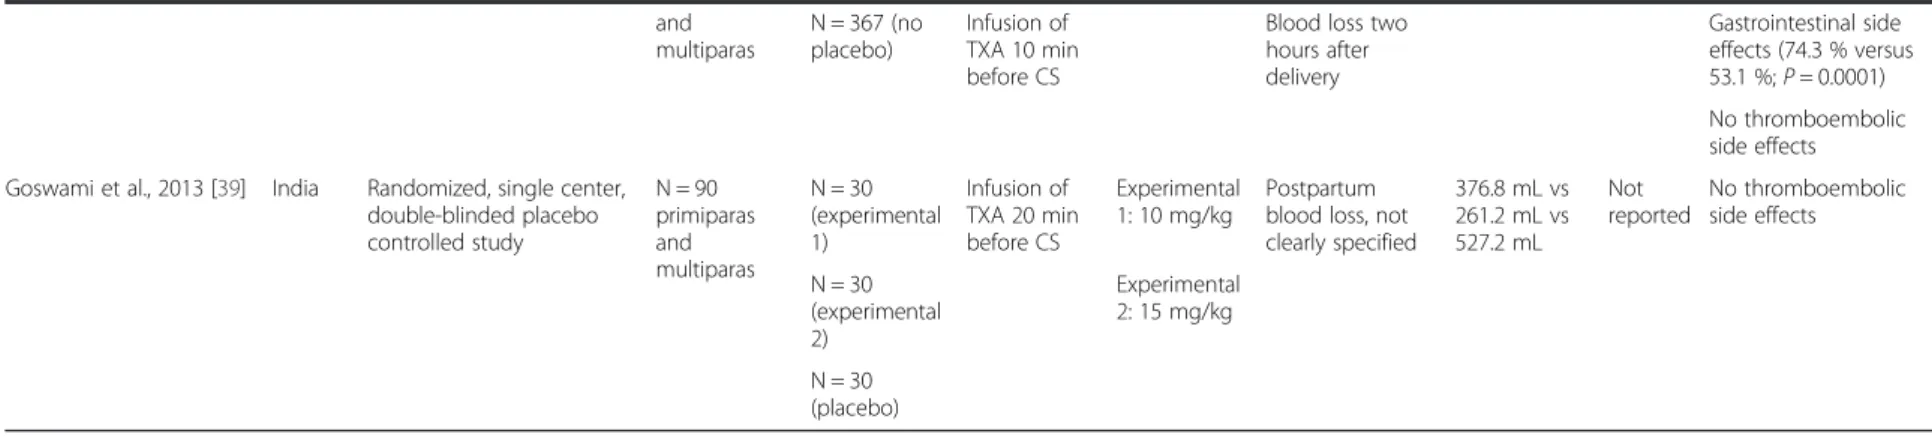 Table 1 Characteristics of the randomized trials that have assessed tranexamic acid for preventing postpartum hemorrhage after cesarean delivery (Continued) and multiparas Infusion of TXA 10 min before CS